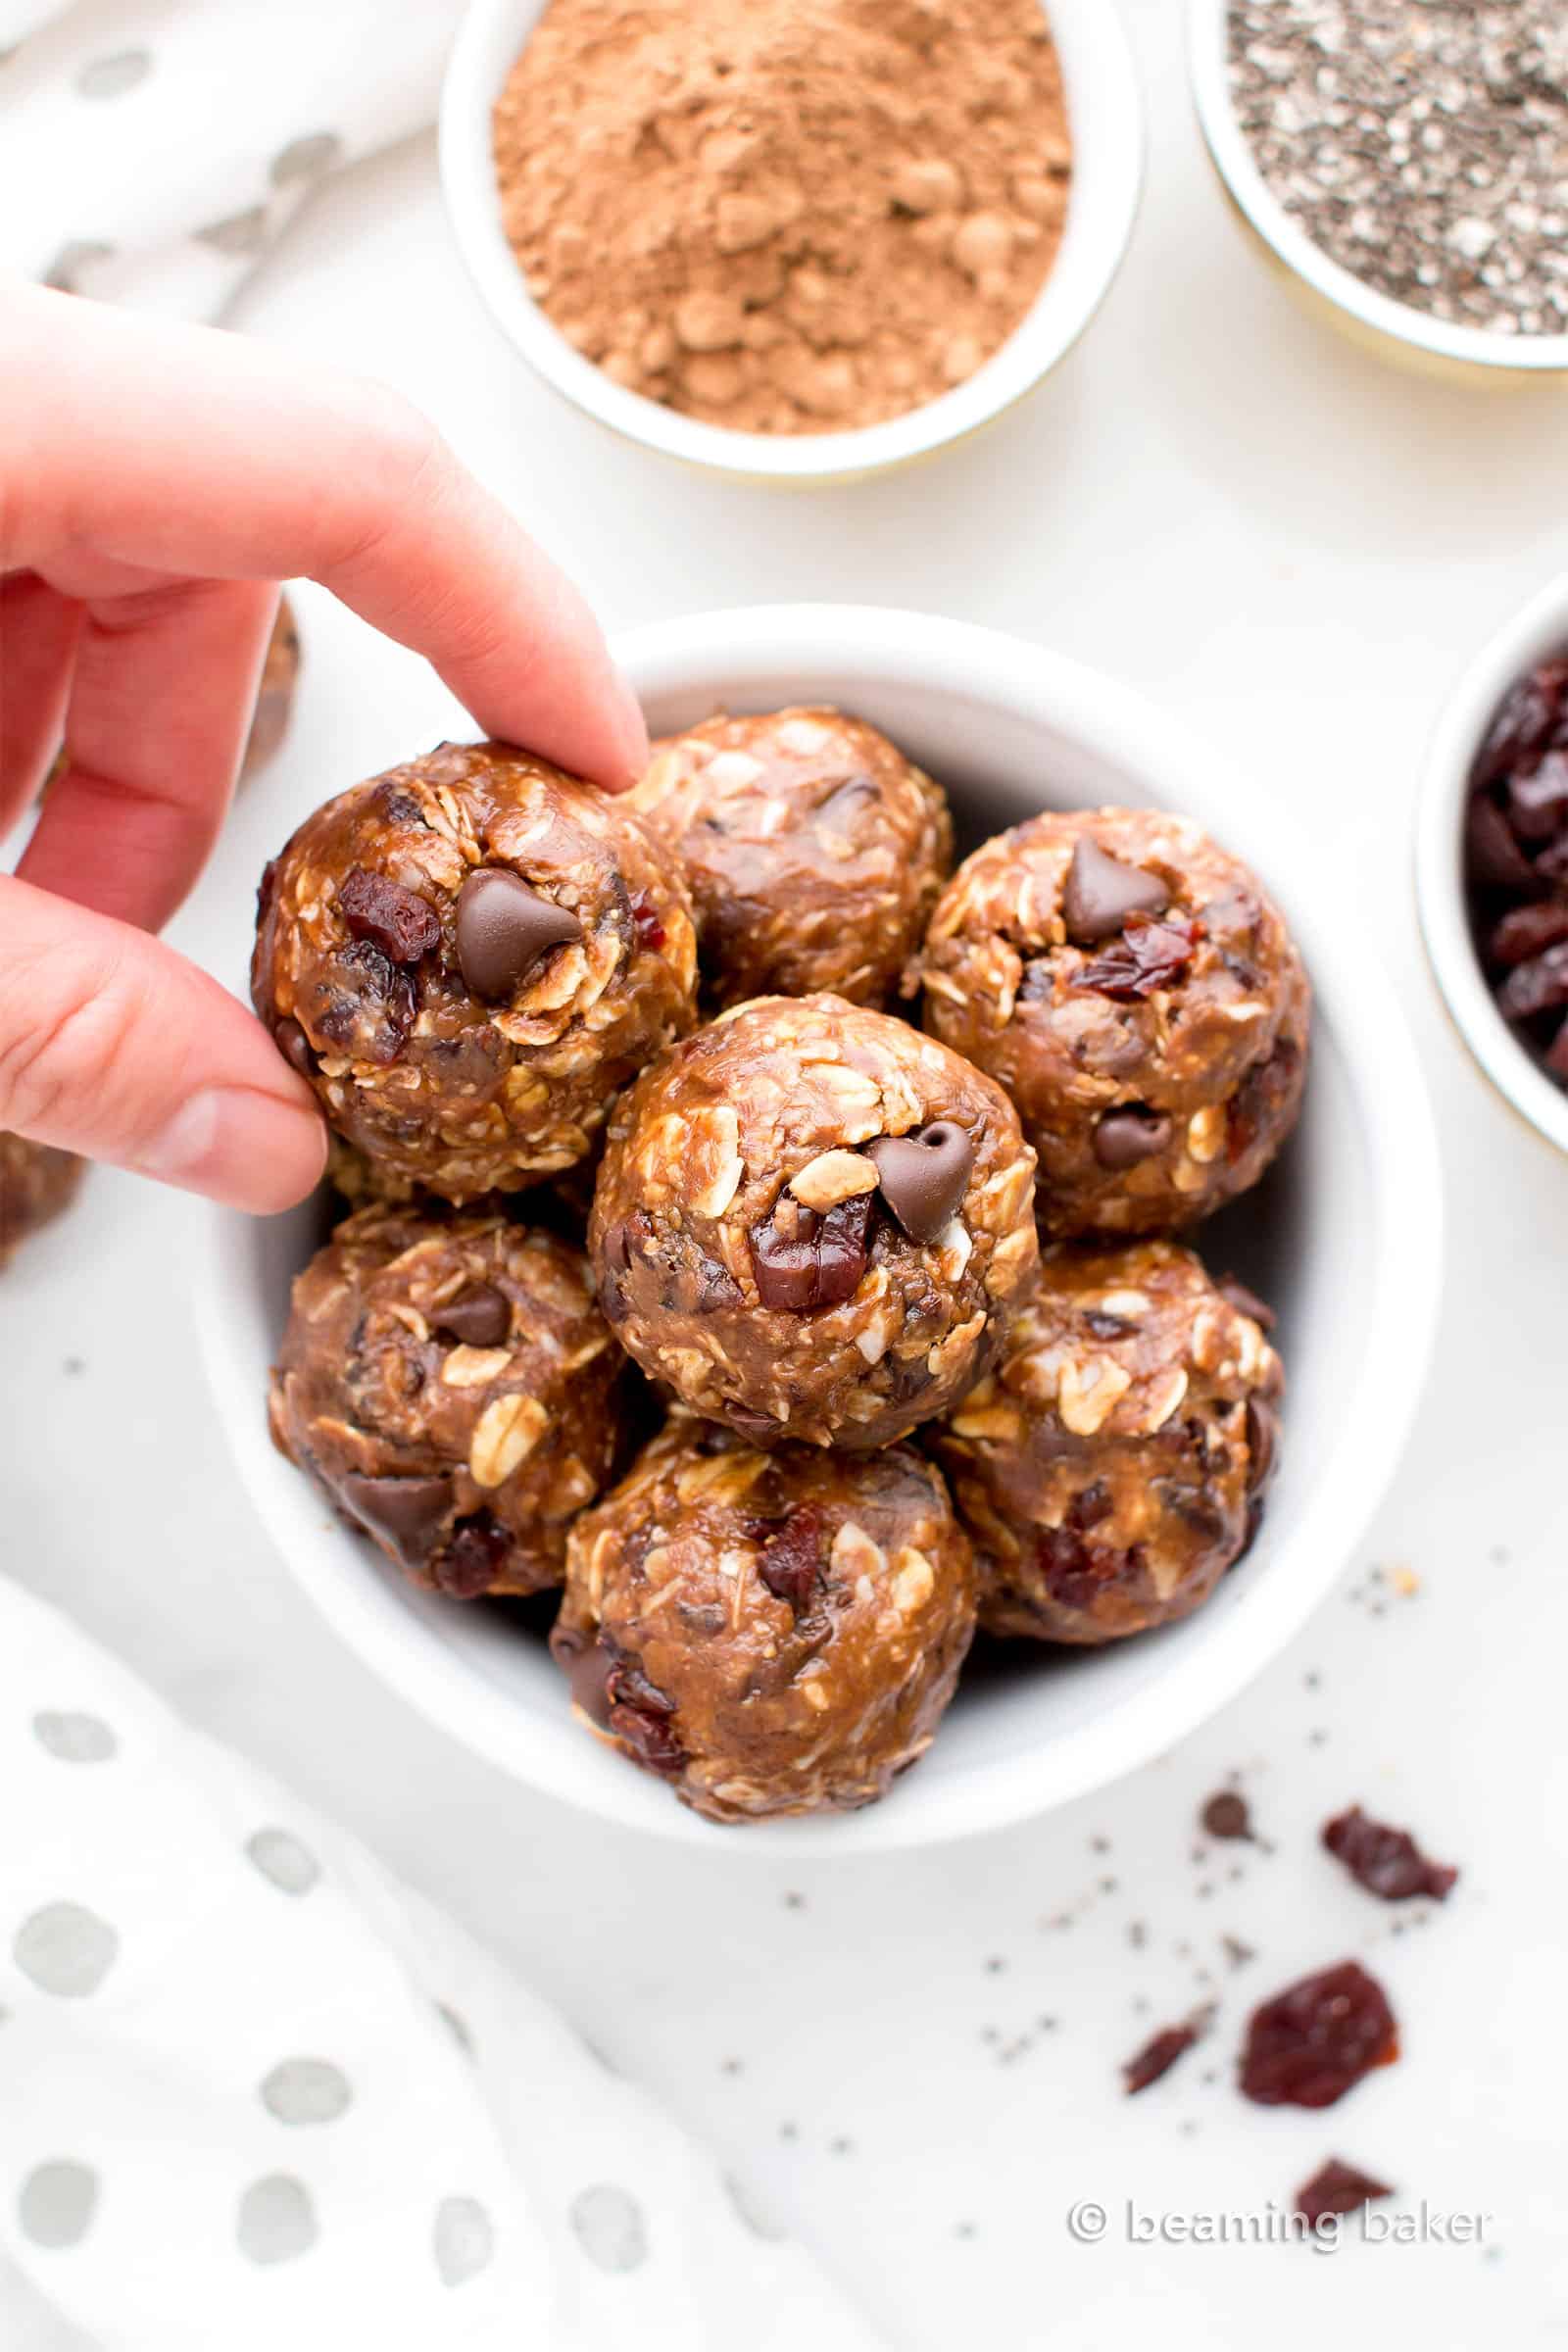 No Bake Energy Bites: a super easy no bake energy bites recipe made with simple, healthy ingredients and bursting with chocolate flavor! #NoBake #EnergyBites #Healthy #EnergyBalls | Recipe at BeamingBaker.com